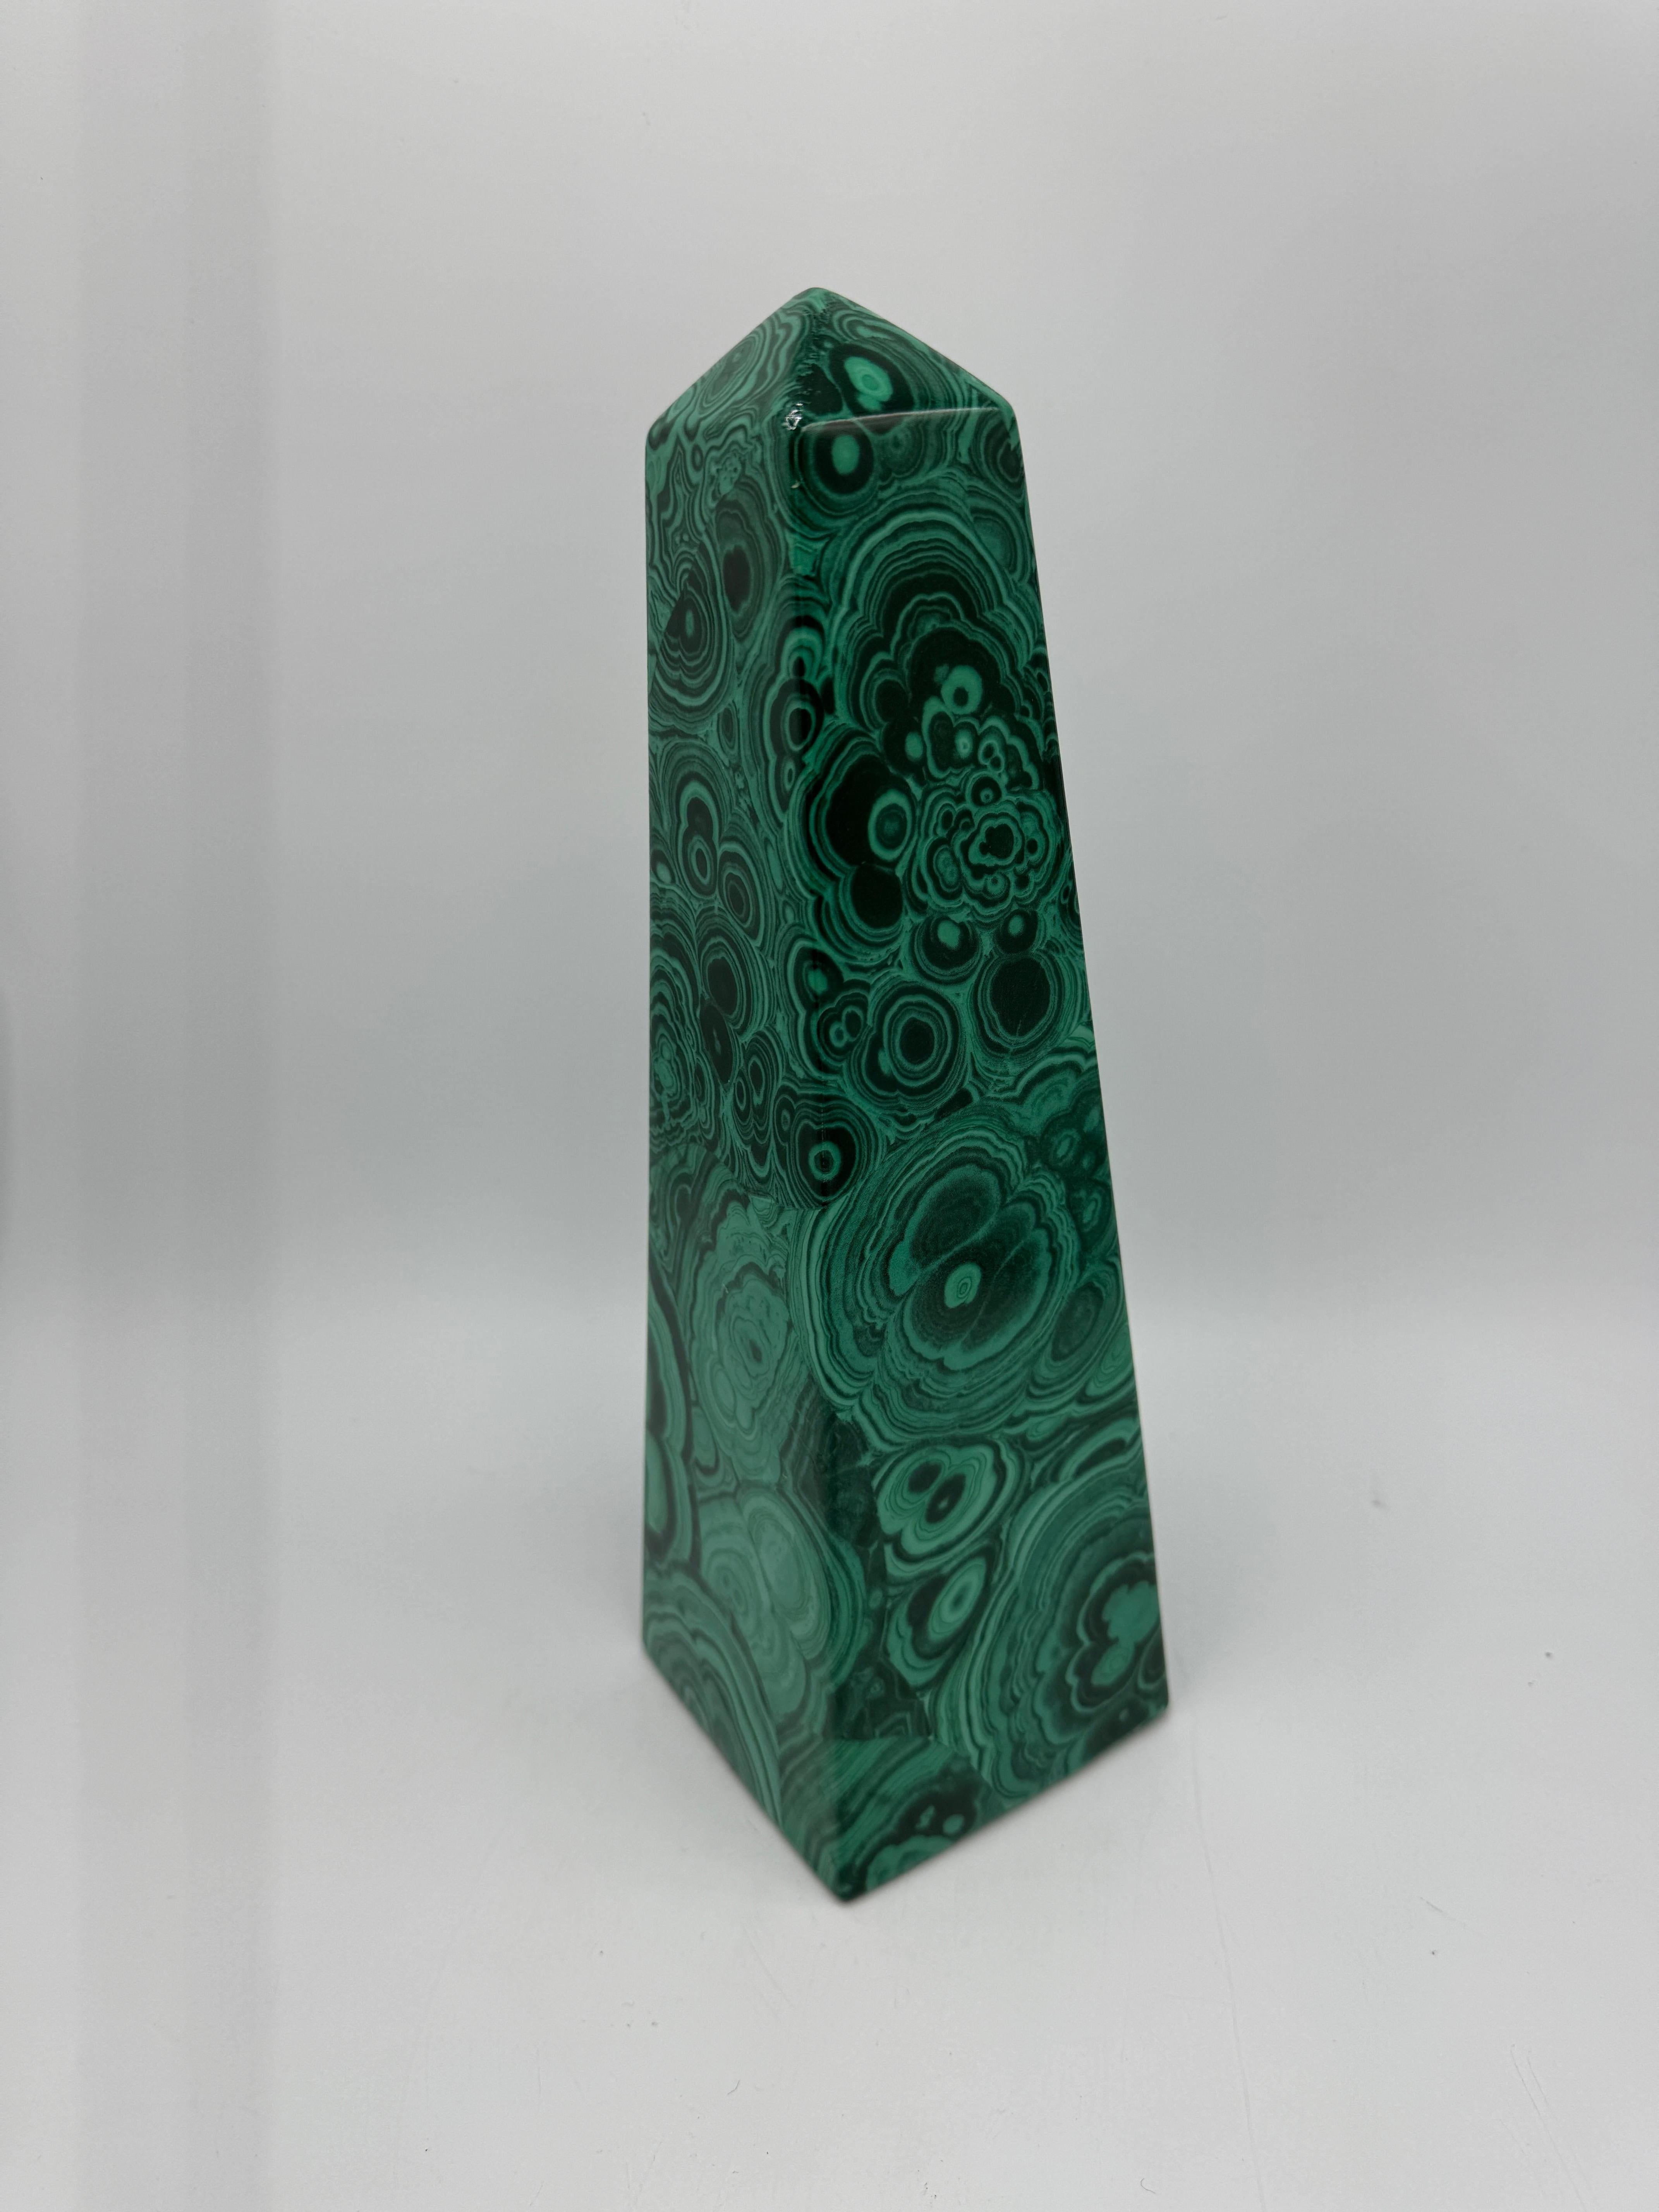 Offered is a fabulous, 1970s porcelain obelisk with a faux malachite design all over, attributed to Neiman Marcus' malachite design porcelain collection. Tall, standing just over 12in. Felt pads on underside. Hollow, but heavy - weighing 1.10lbs.